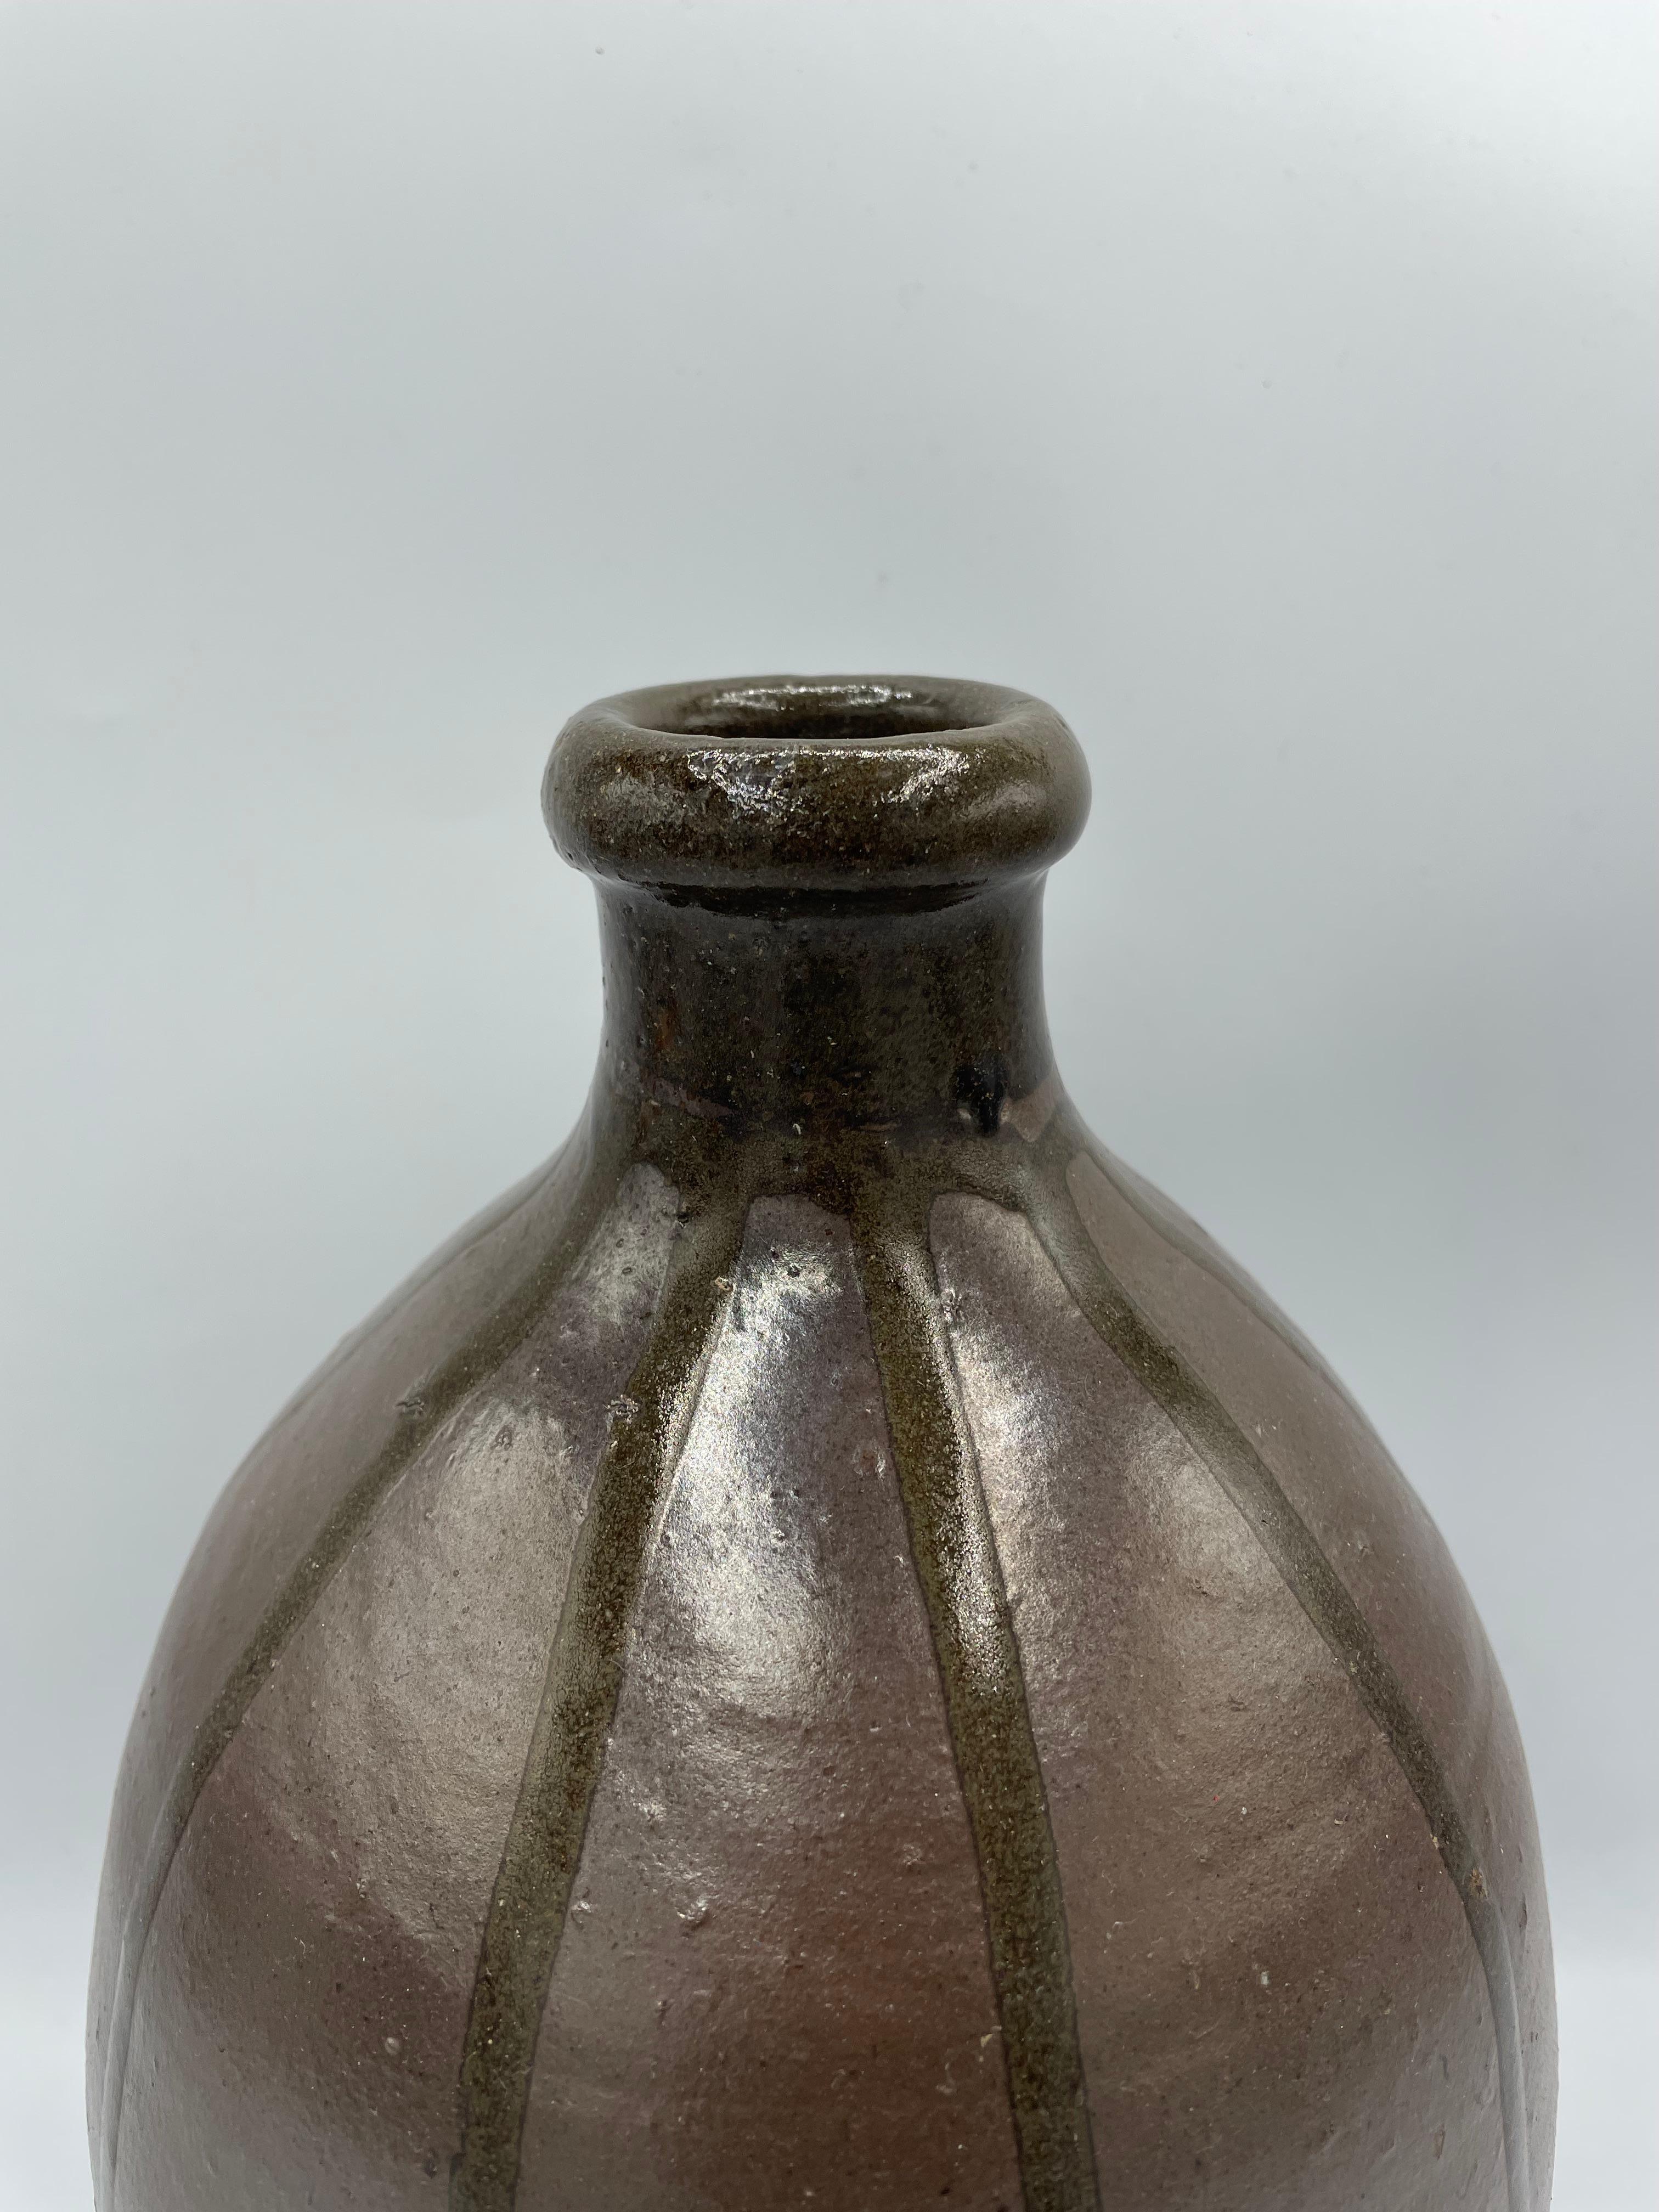 This is a sake bottle which was made around 1900s in Meiji era.
These kind of bottles are called Kayoi tokkuri or Binbo tokkuri.
It can be used as a sake bottle but also as a flower vase.

It is thought to have been distributed from the late Edo